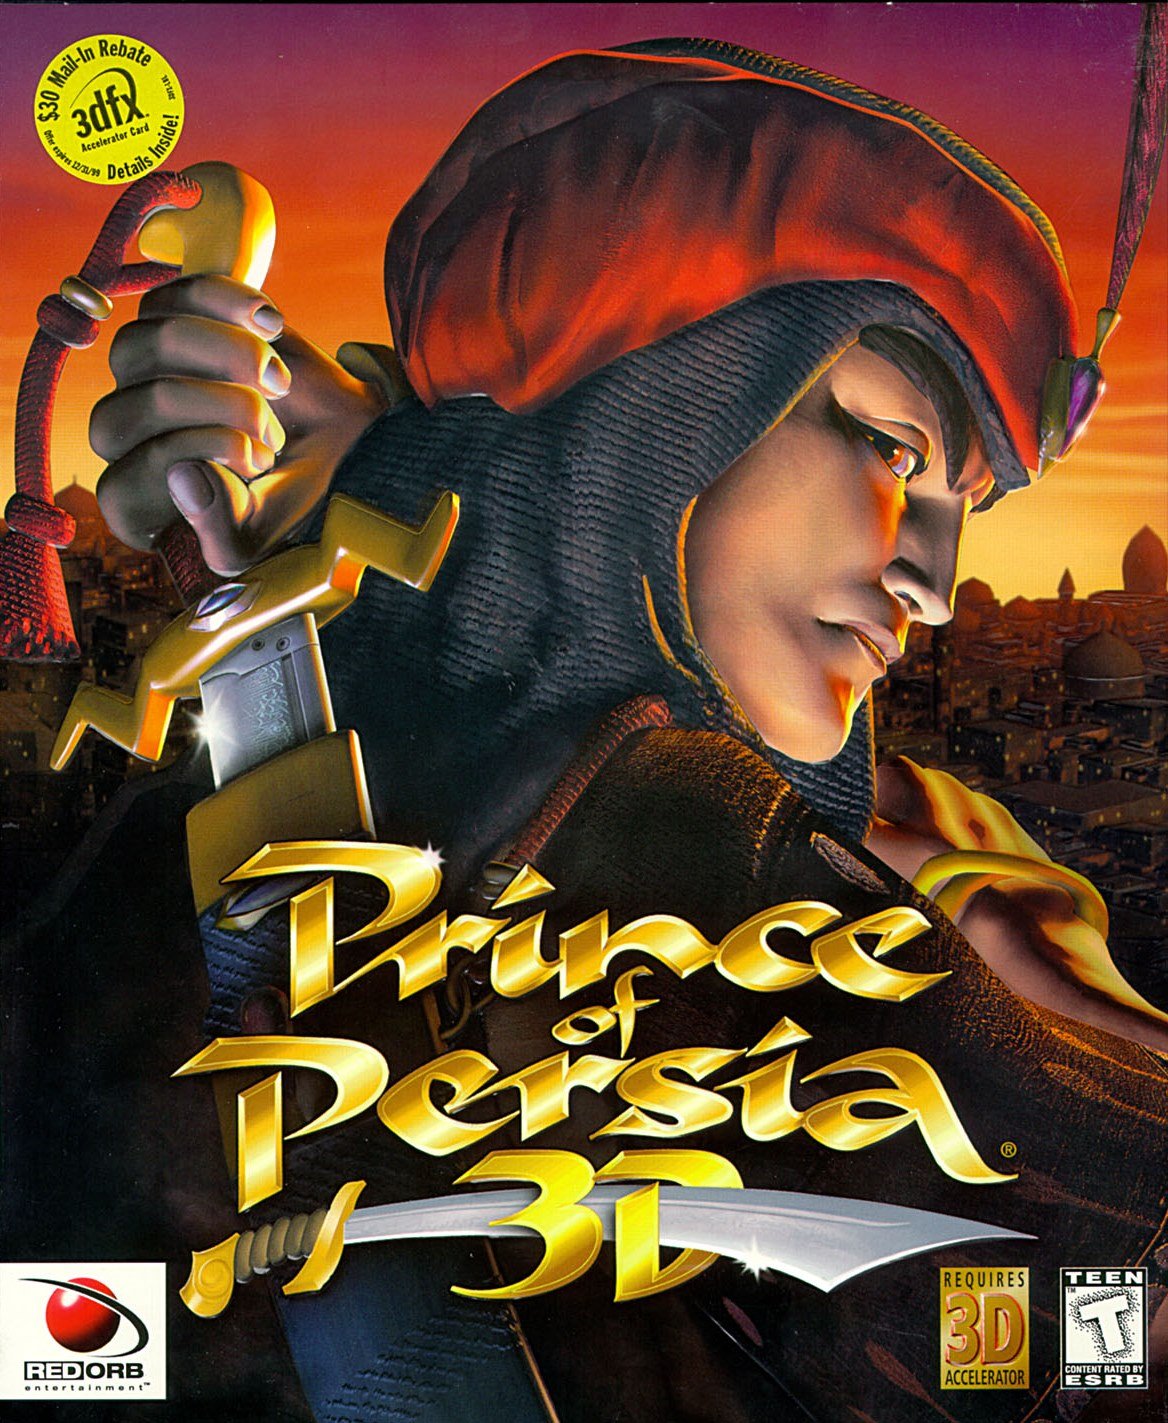 Image of Prince of Persia 3D